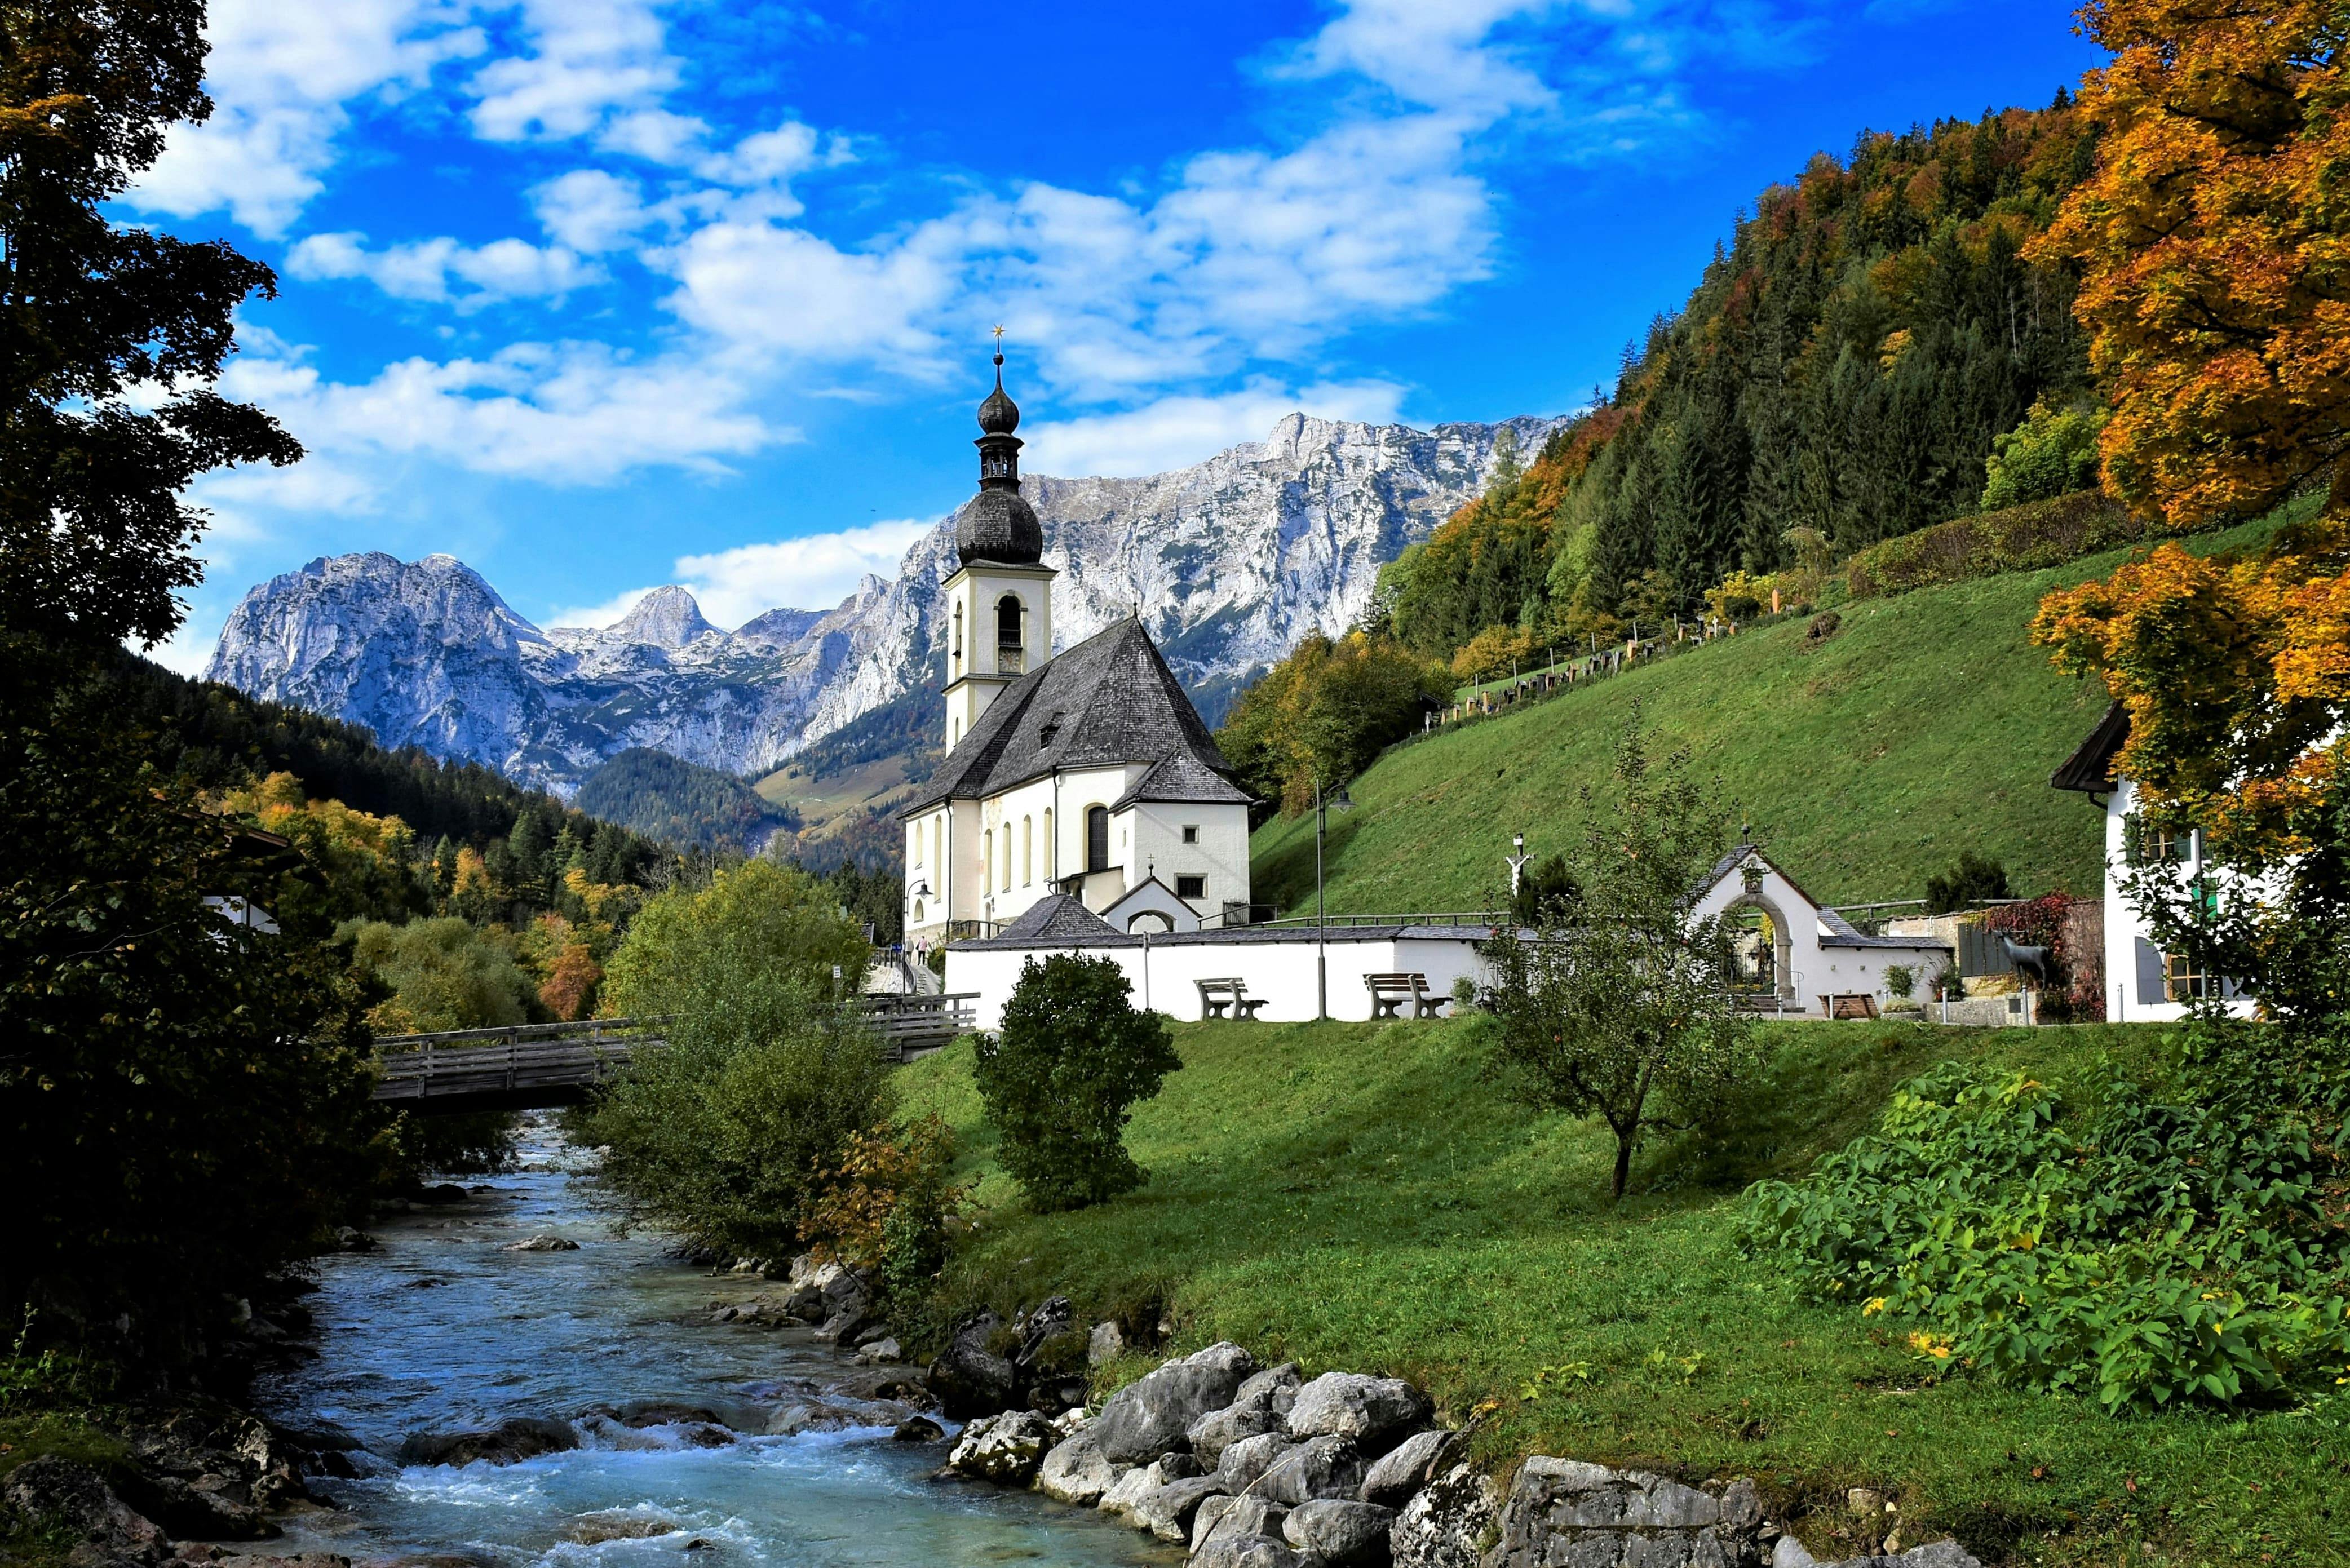 Day Trip to Berchtesgaden in the Bavarian Alps